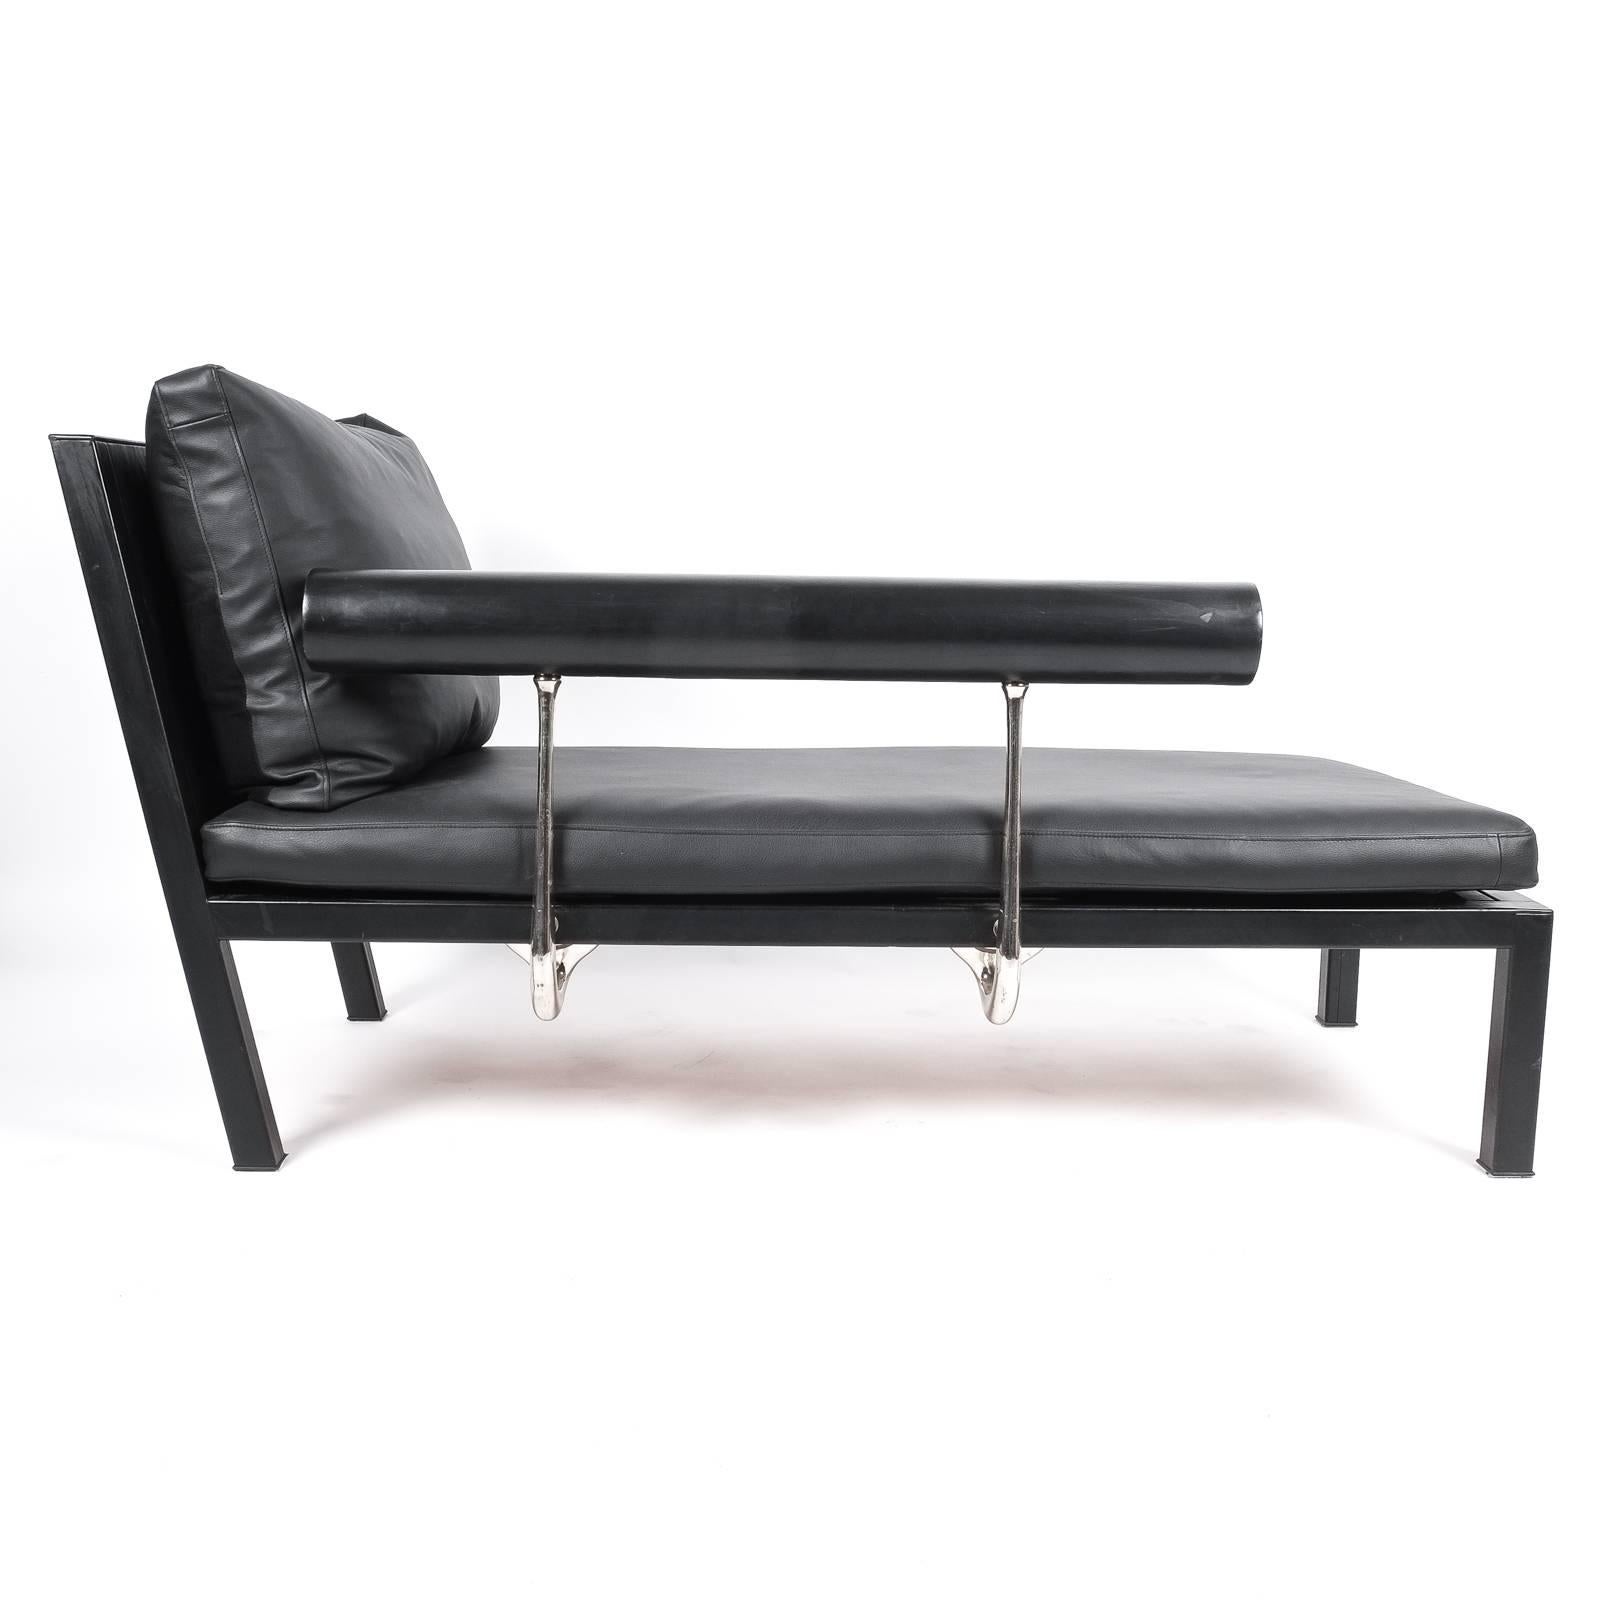 Leather chaise lounge Baisity by Antonio Citterio for B&B Italy, 1982. Elegant chaise lounge featuring a leather upholstered steel-frame and backrest, a black leather cushion and a leather mattress from the Stunning polished aluminium details. It's